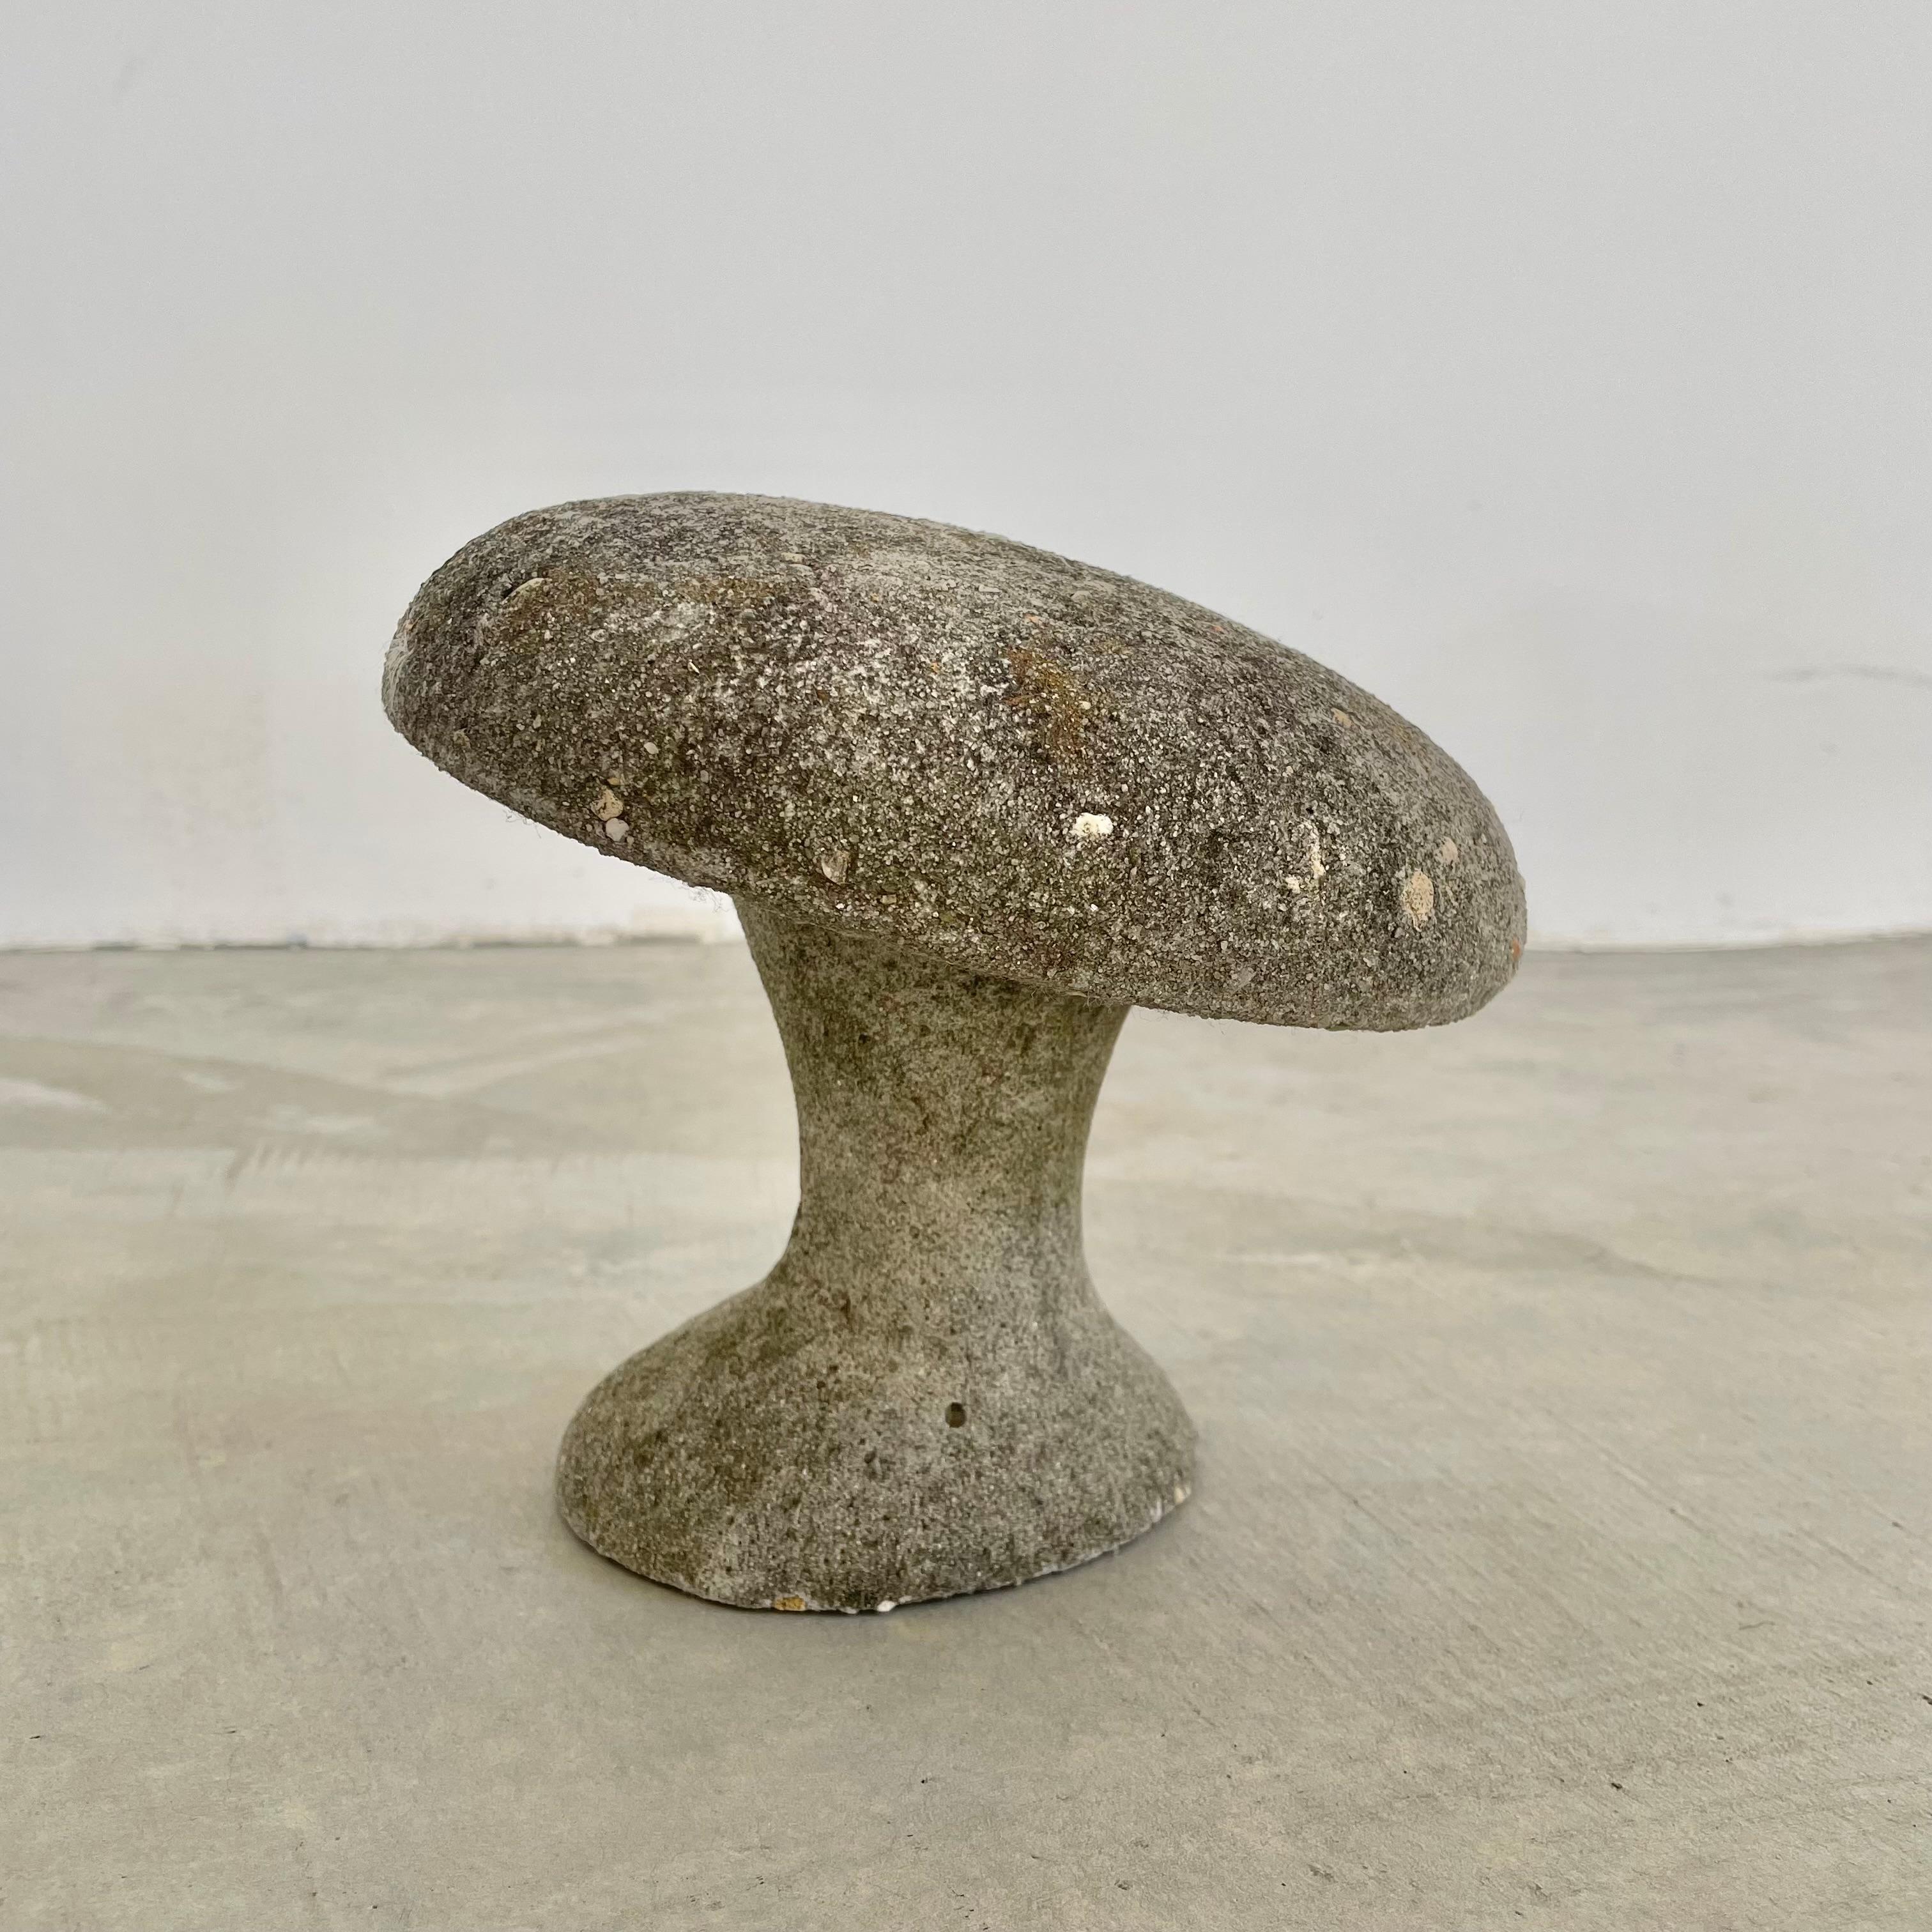 Petite concrete mushroom from the 1980s. Fantastic patina from years of outdoor use. Great design with a curved stem and an angled mushroom canopy. Mixture of small stone and larger stone in the concrete giving it nice texture and detail. Good